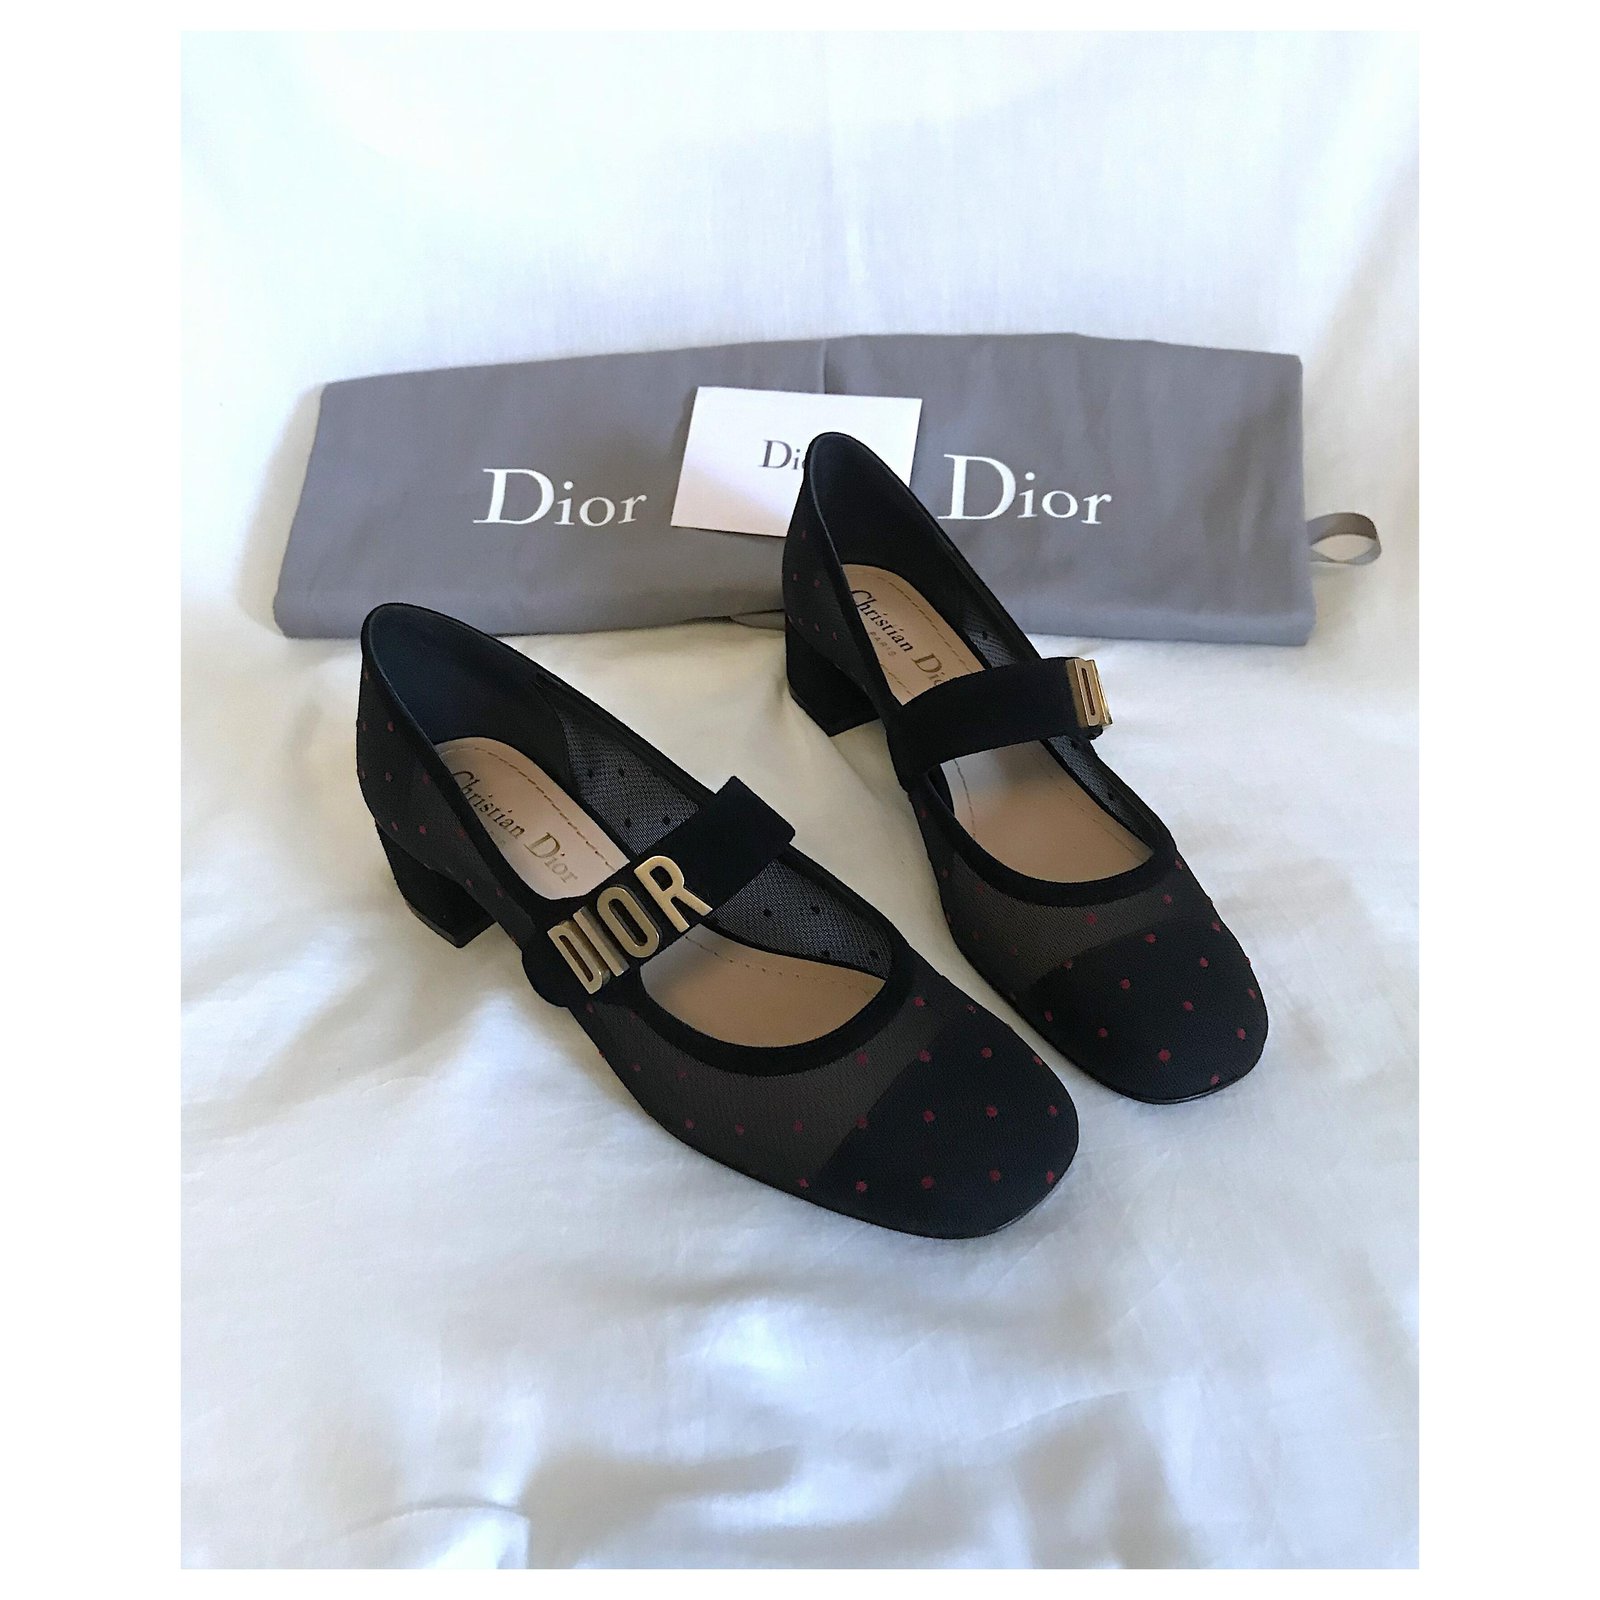 Christian Dior Baby D Ballet Flats Shoes Size 41  Great Condition 790   eBay